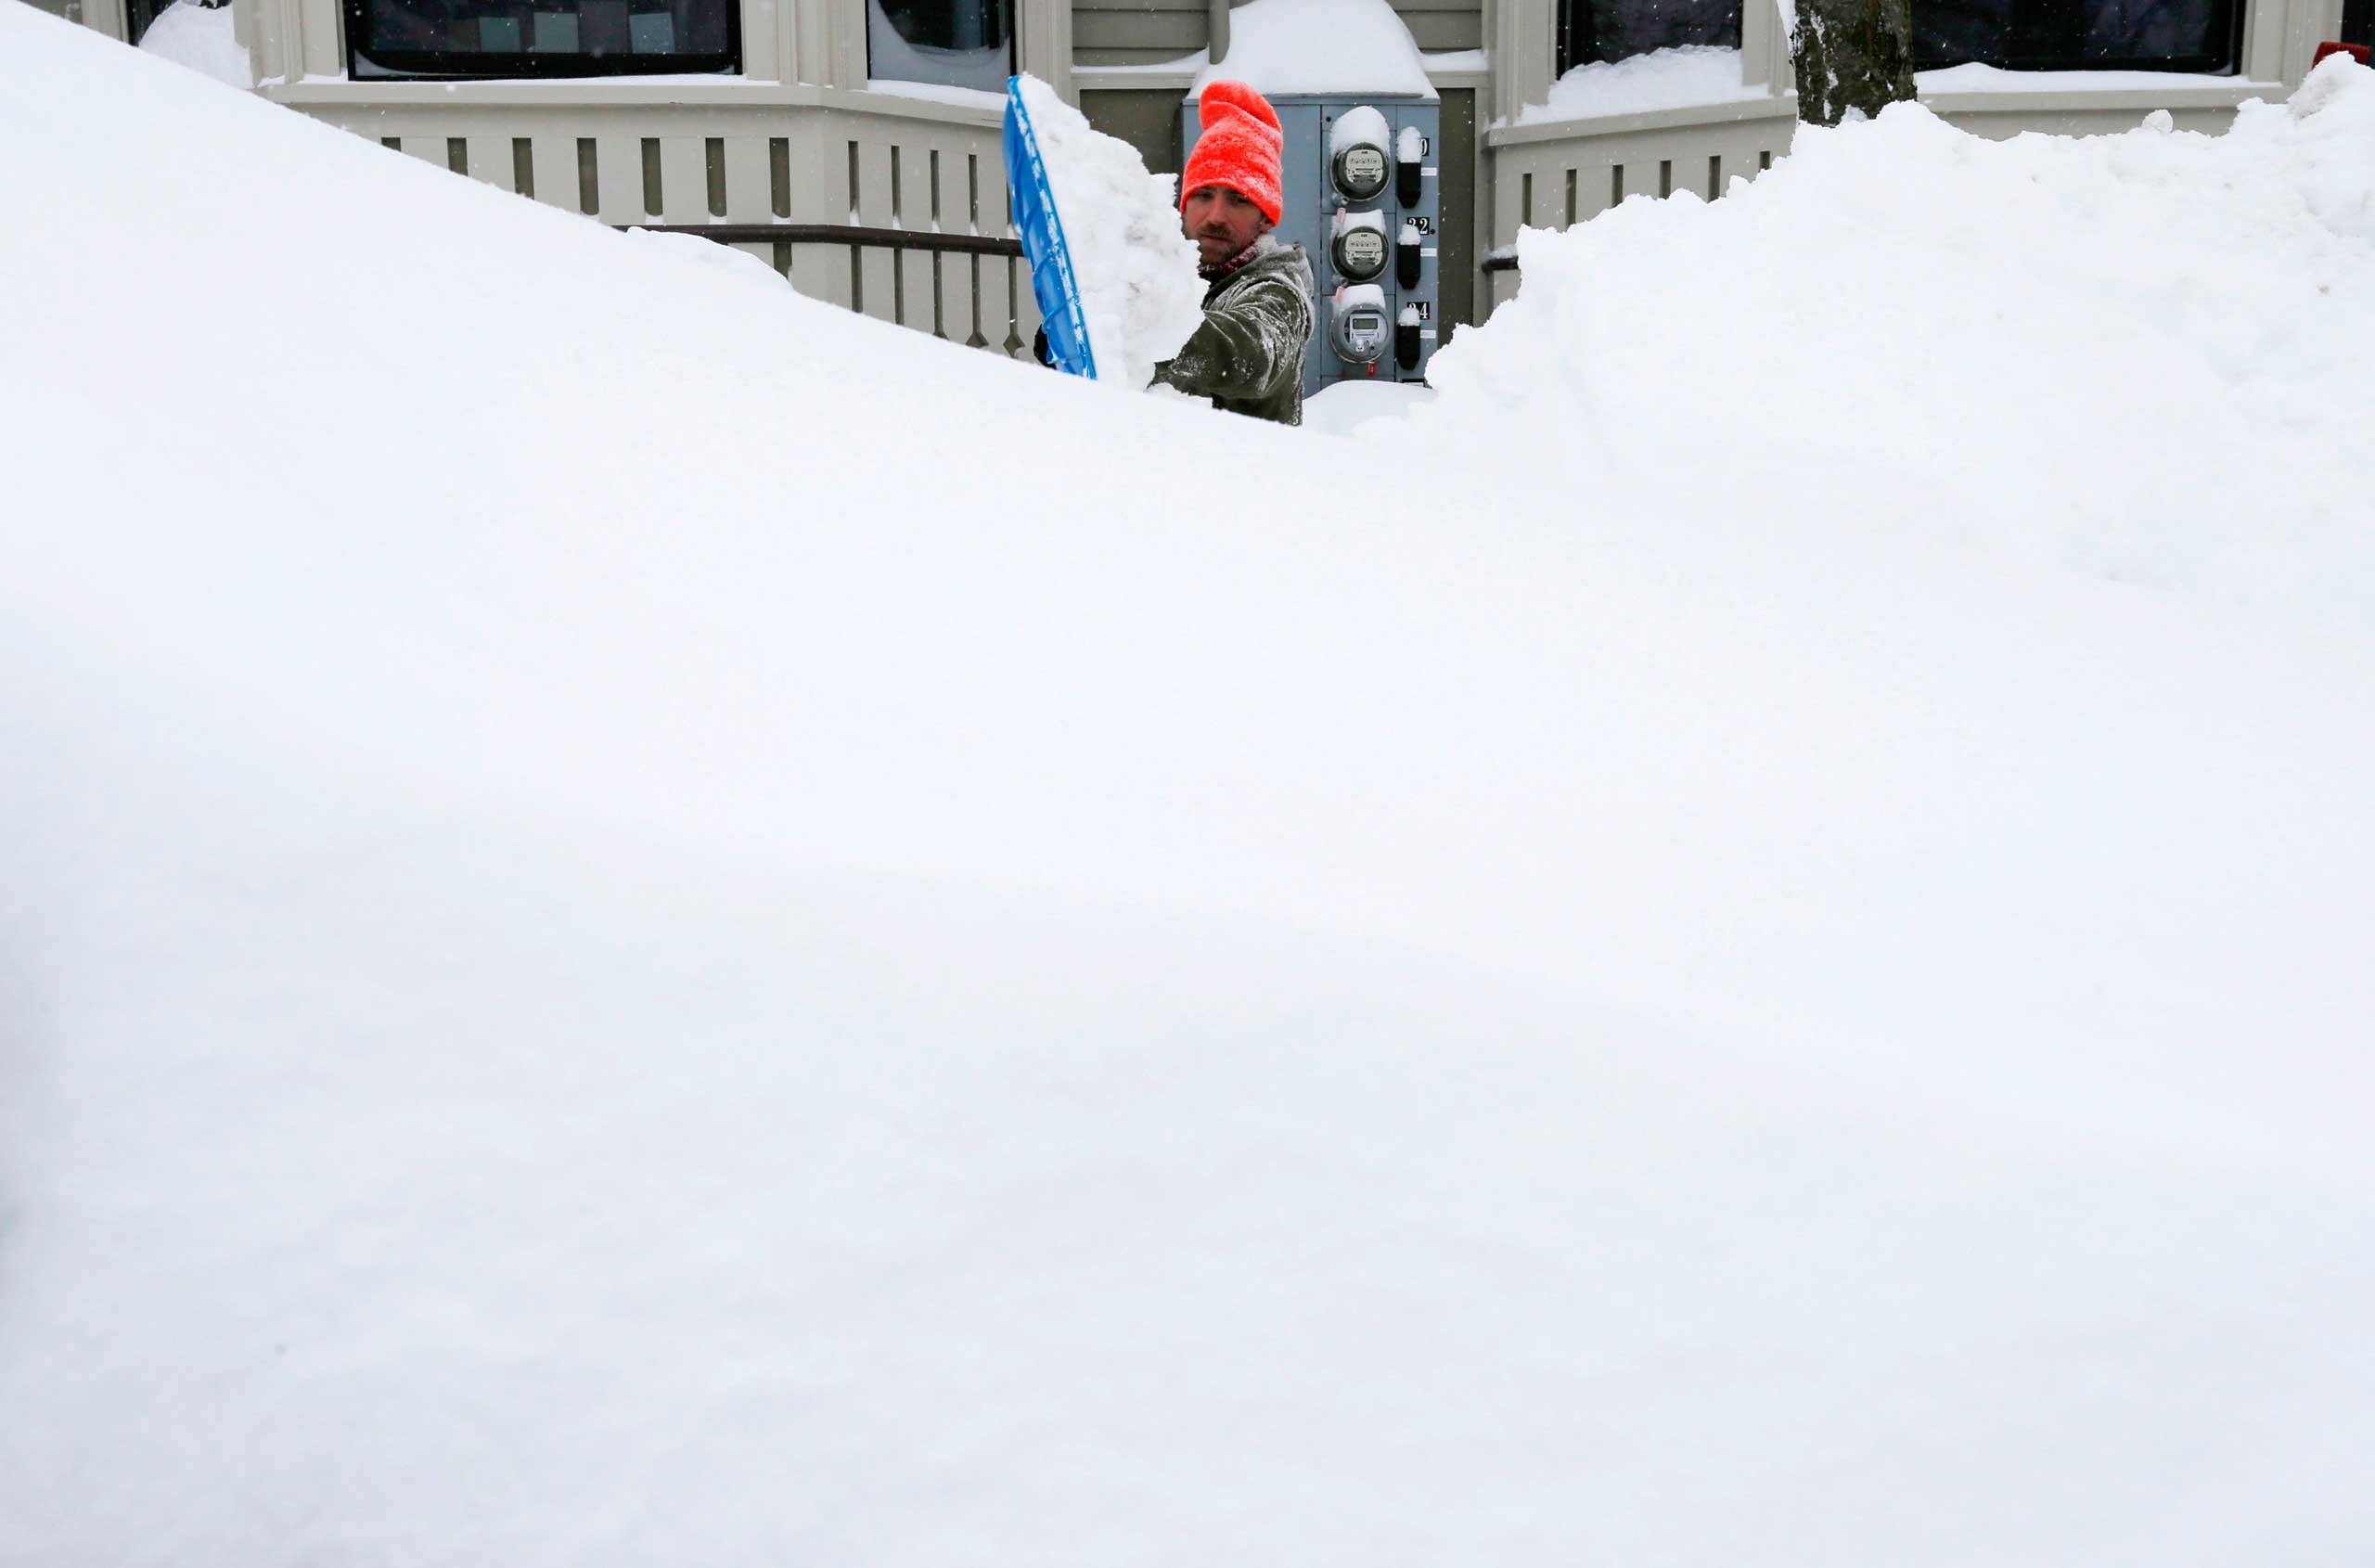 Greg Burkett clears the snow from the front of his house during a winter snowstorm in Cambridge, Mass. on Feb. 9, 2015.